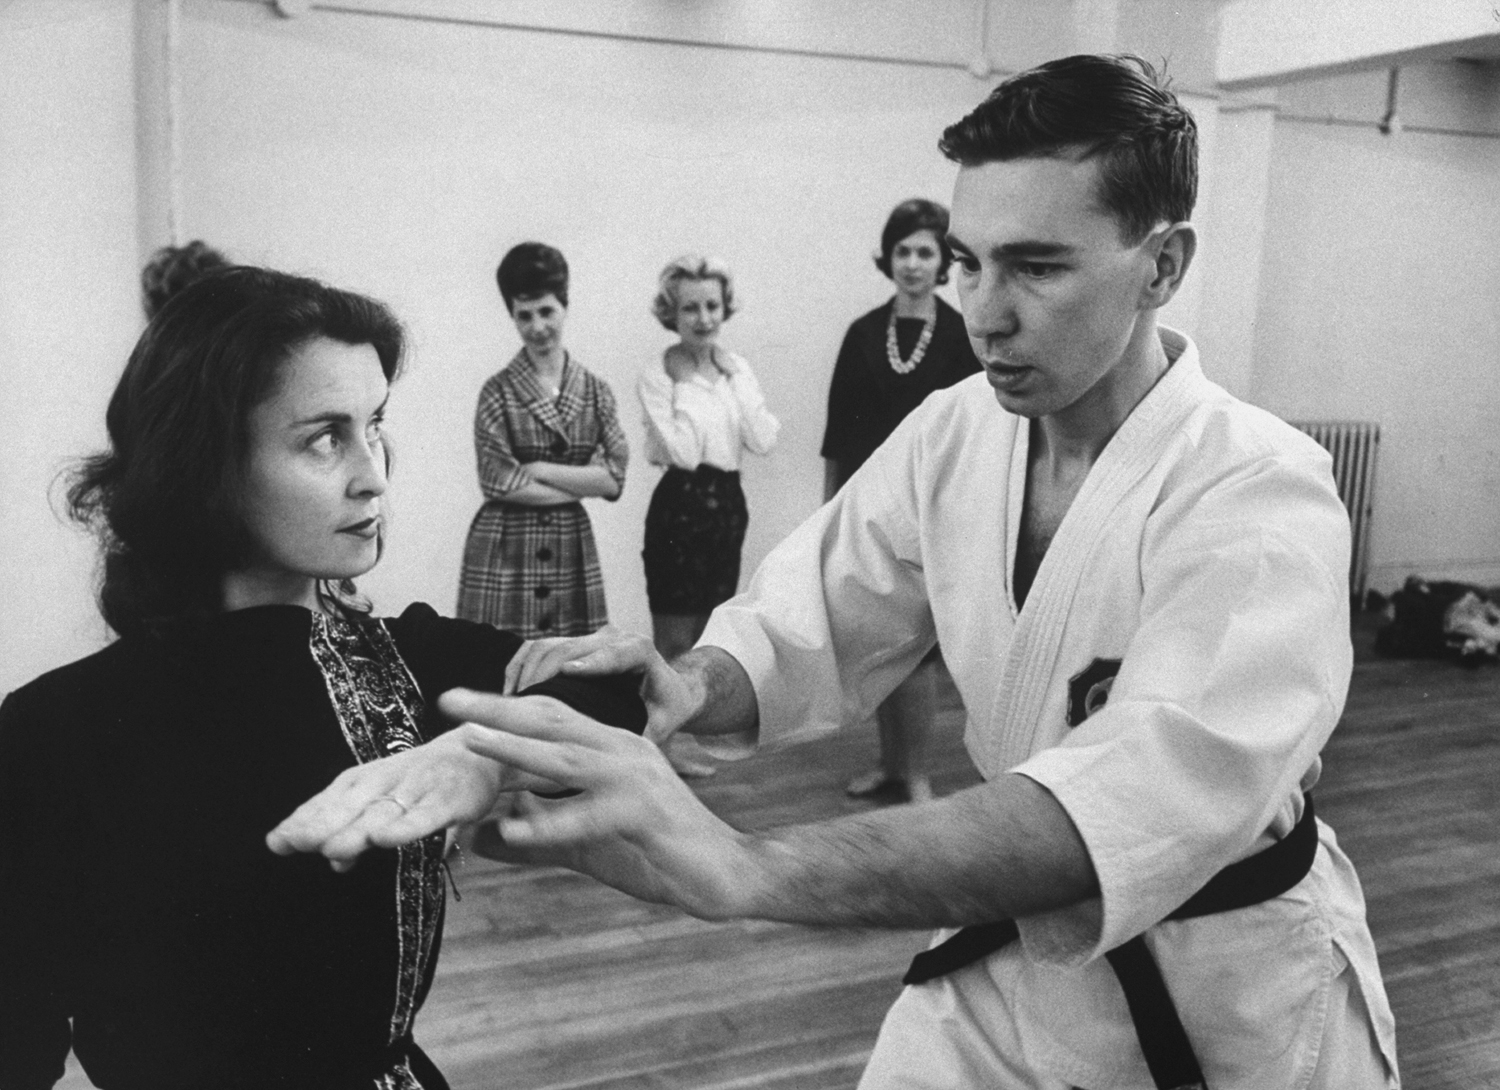 arate expert George Mattson holds extra classes for women in the art of self-defense.